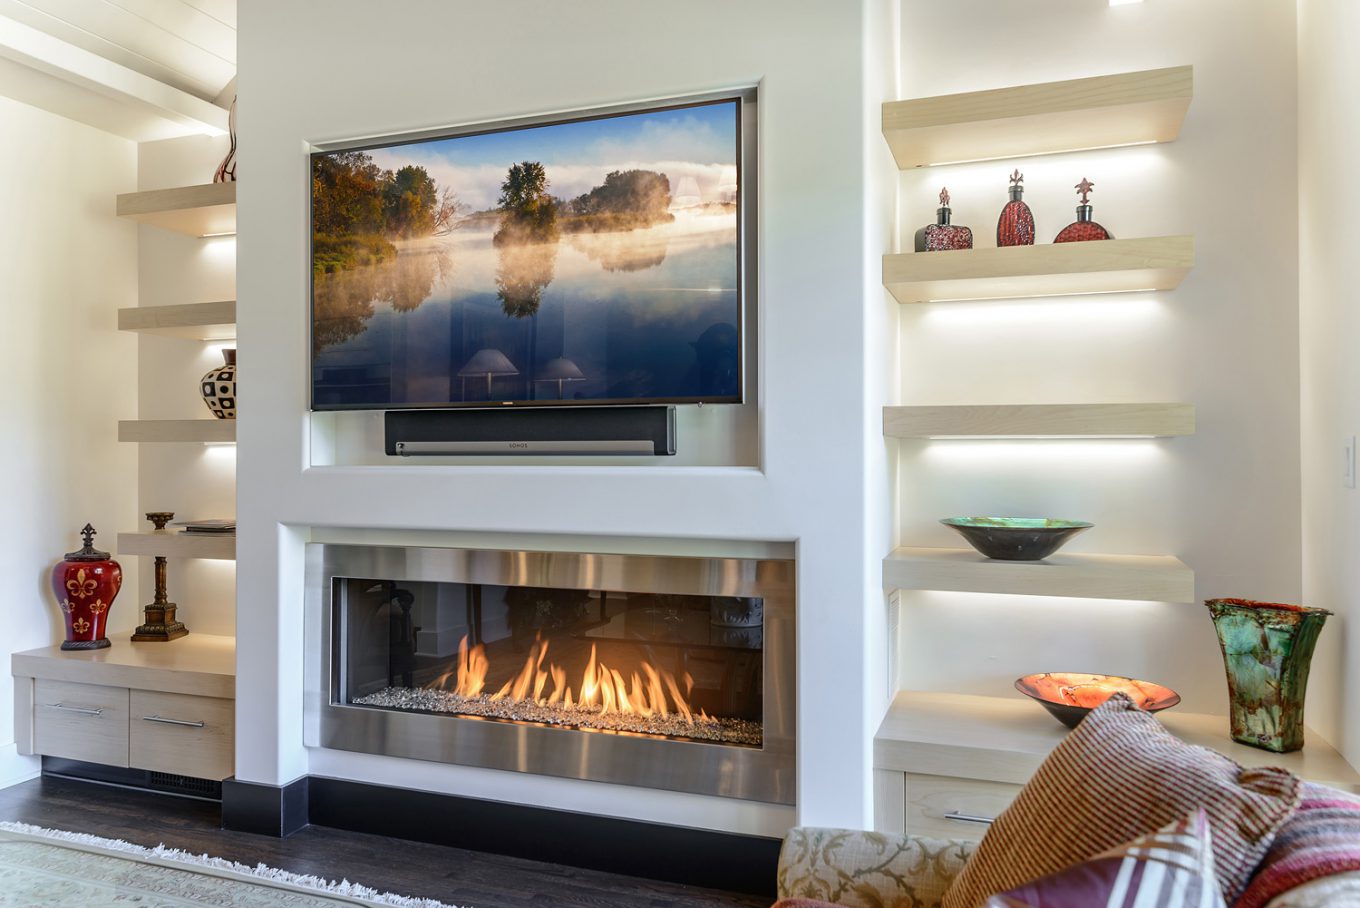 Install A Tv Over Fireplace, How To Install Flat Screen Tv Above Fireplace